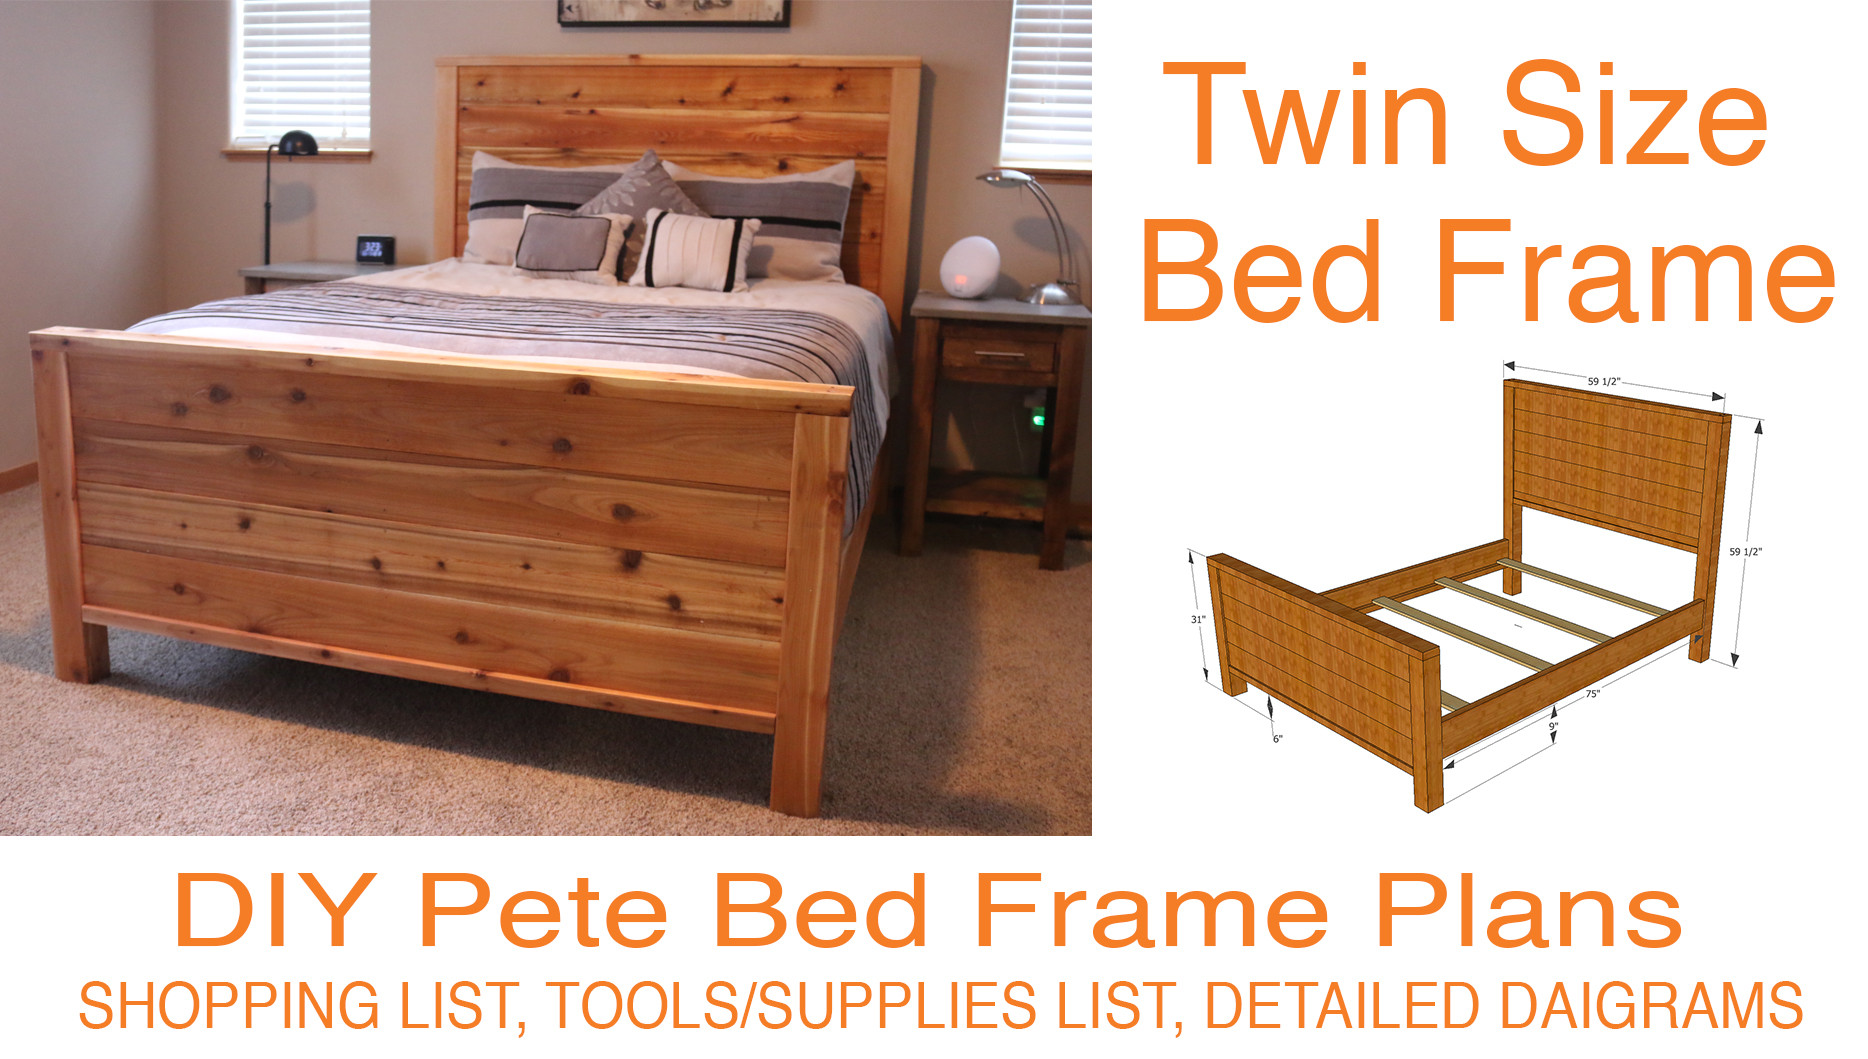 DIY Twin Bed Plans
 DIY Bed Frame Plans How to Make a bed frame with DIY Pete